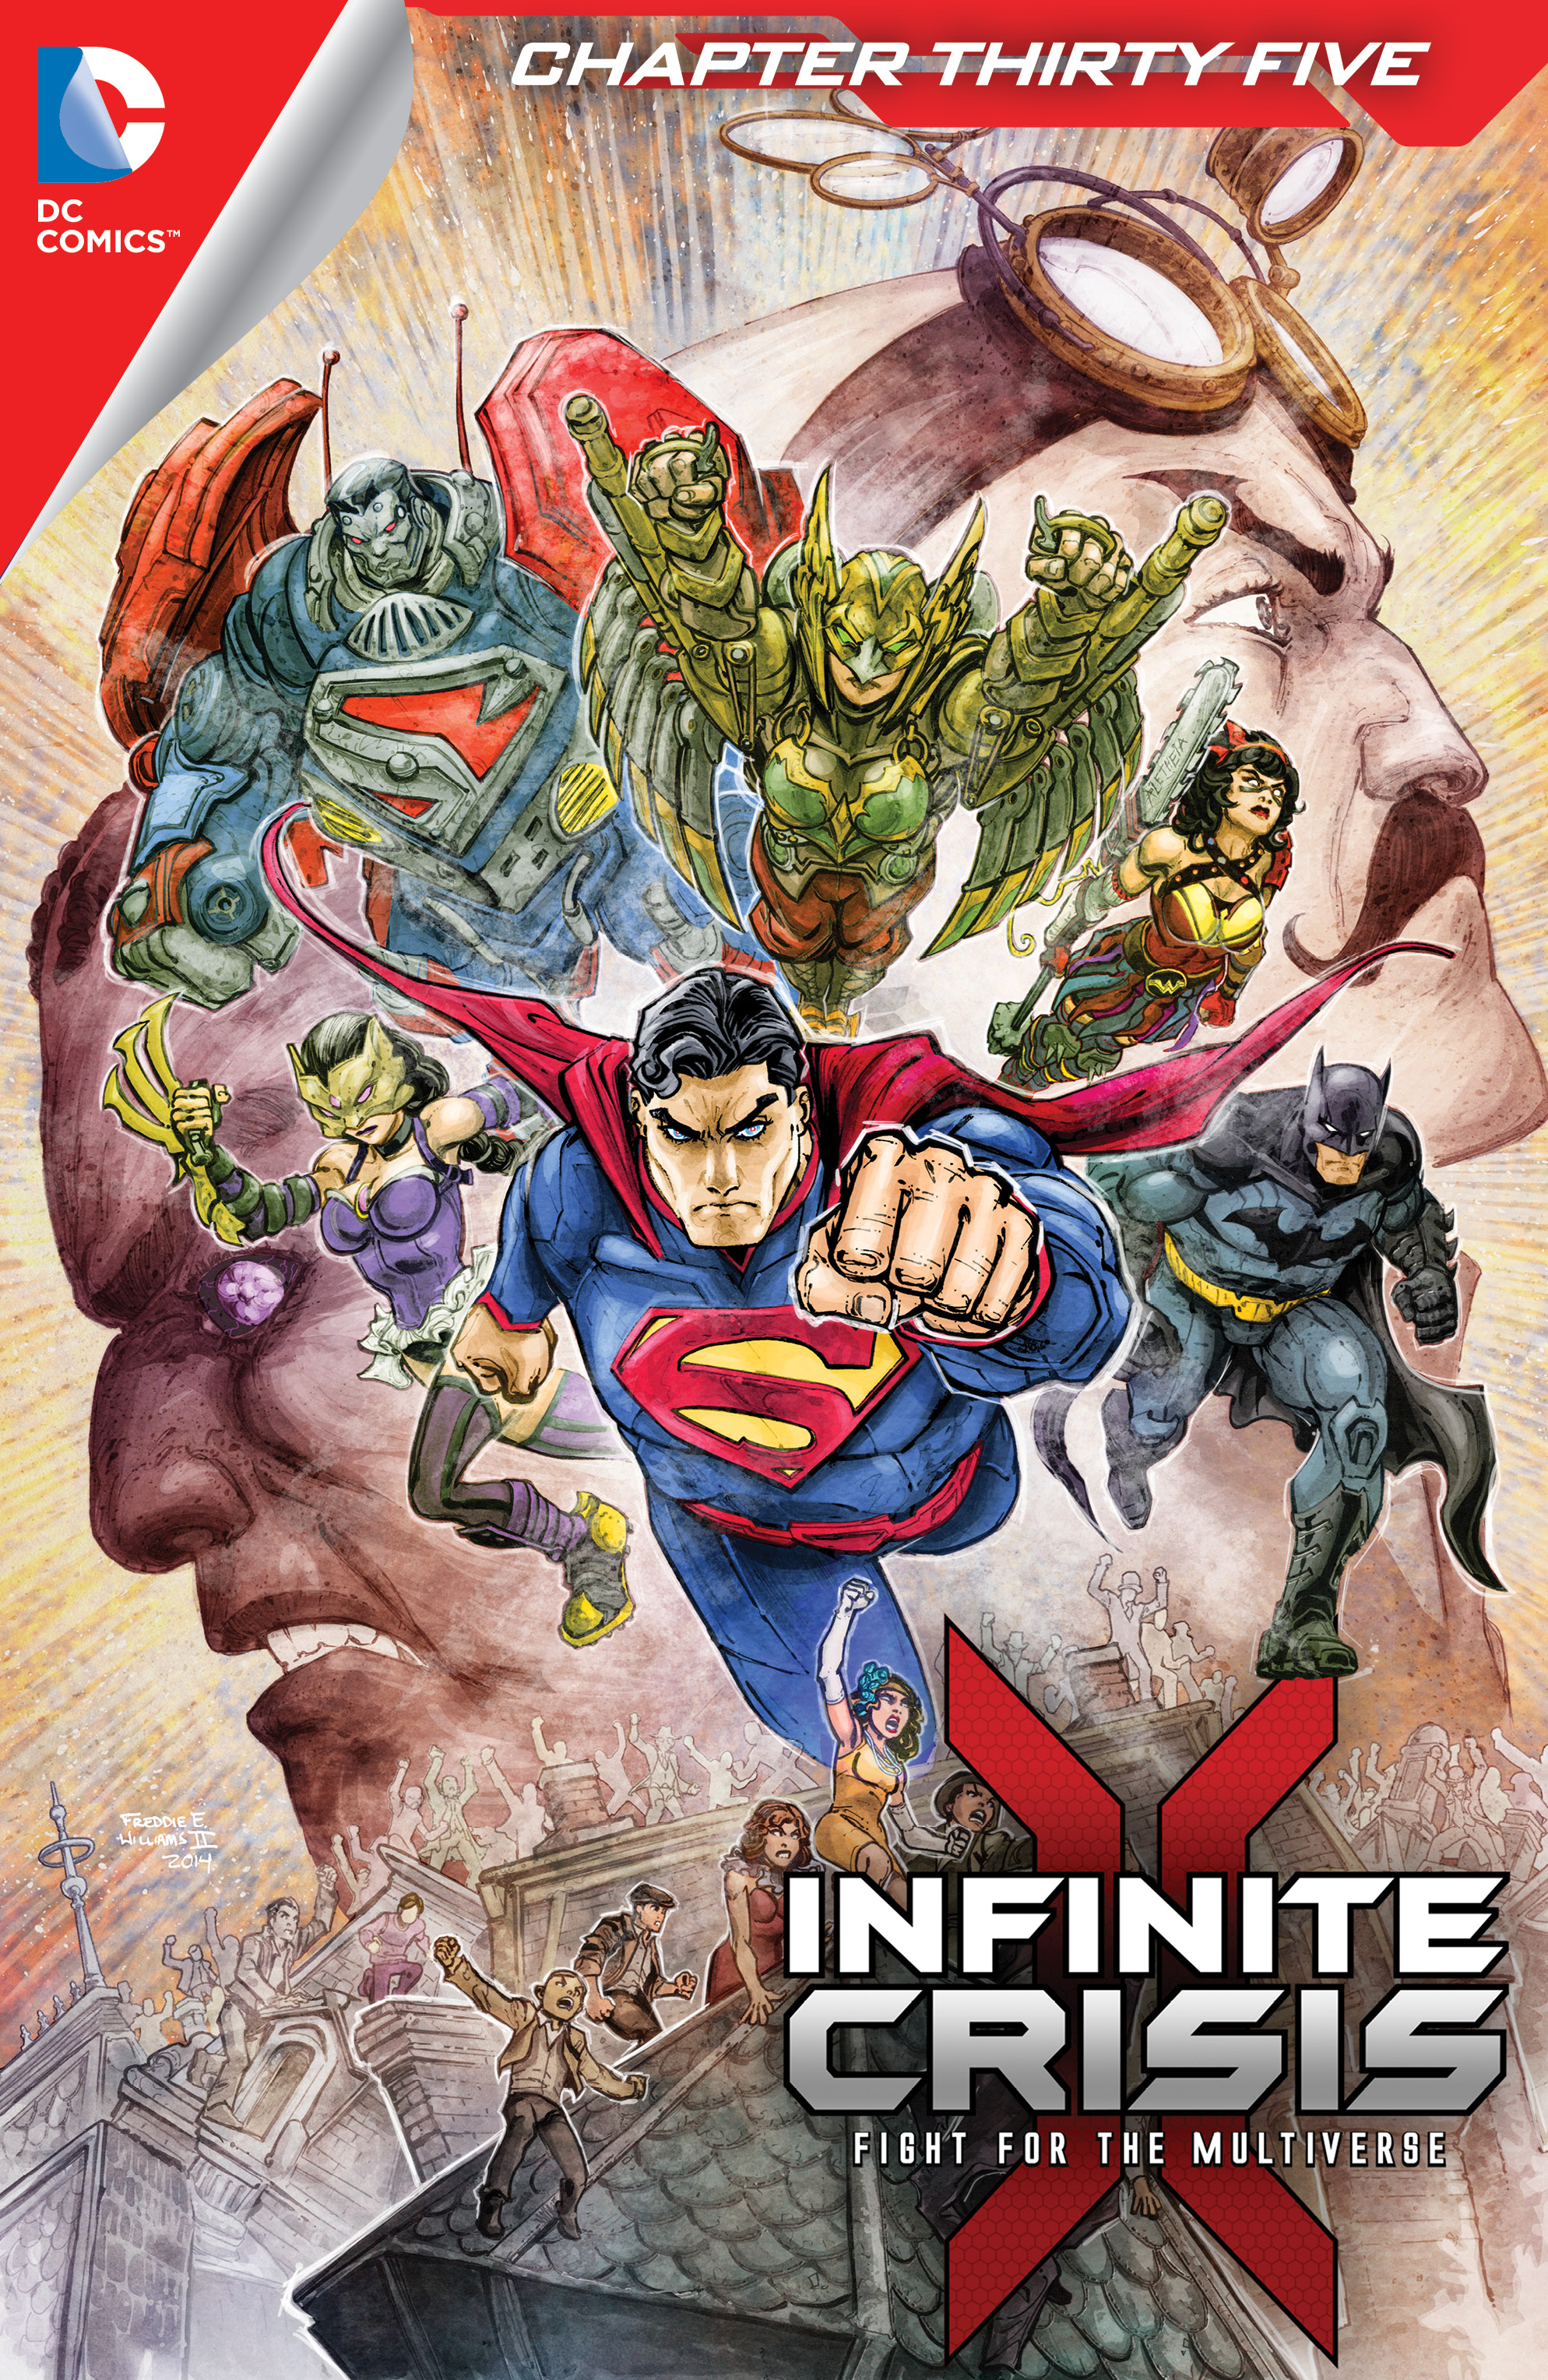 Infinite Crisis: Fight for the Multiverse #35 preview images